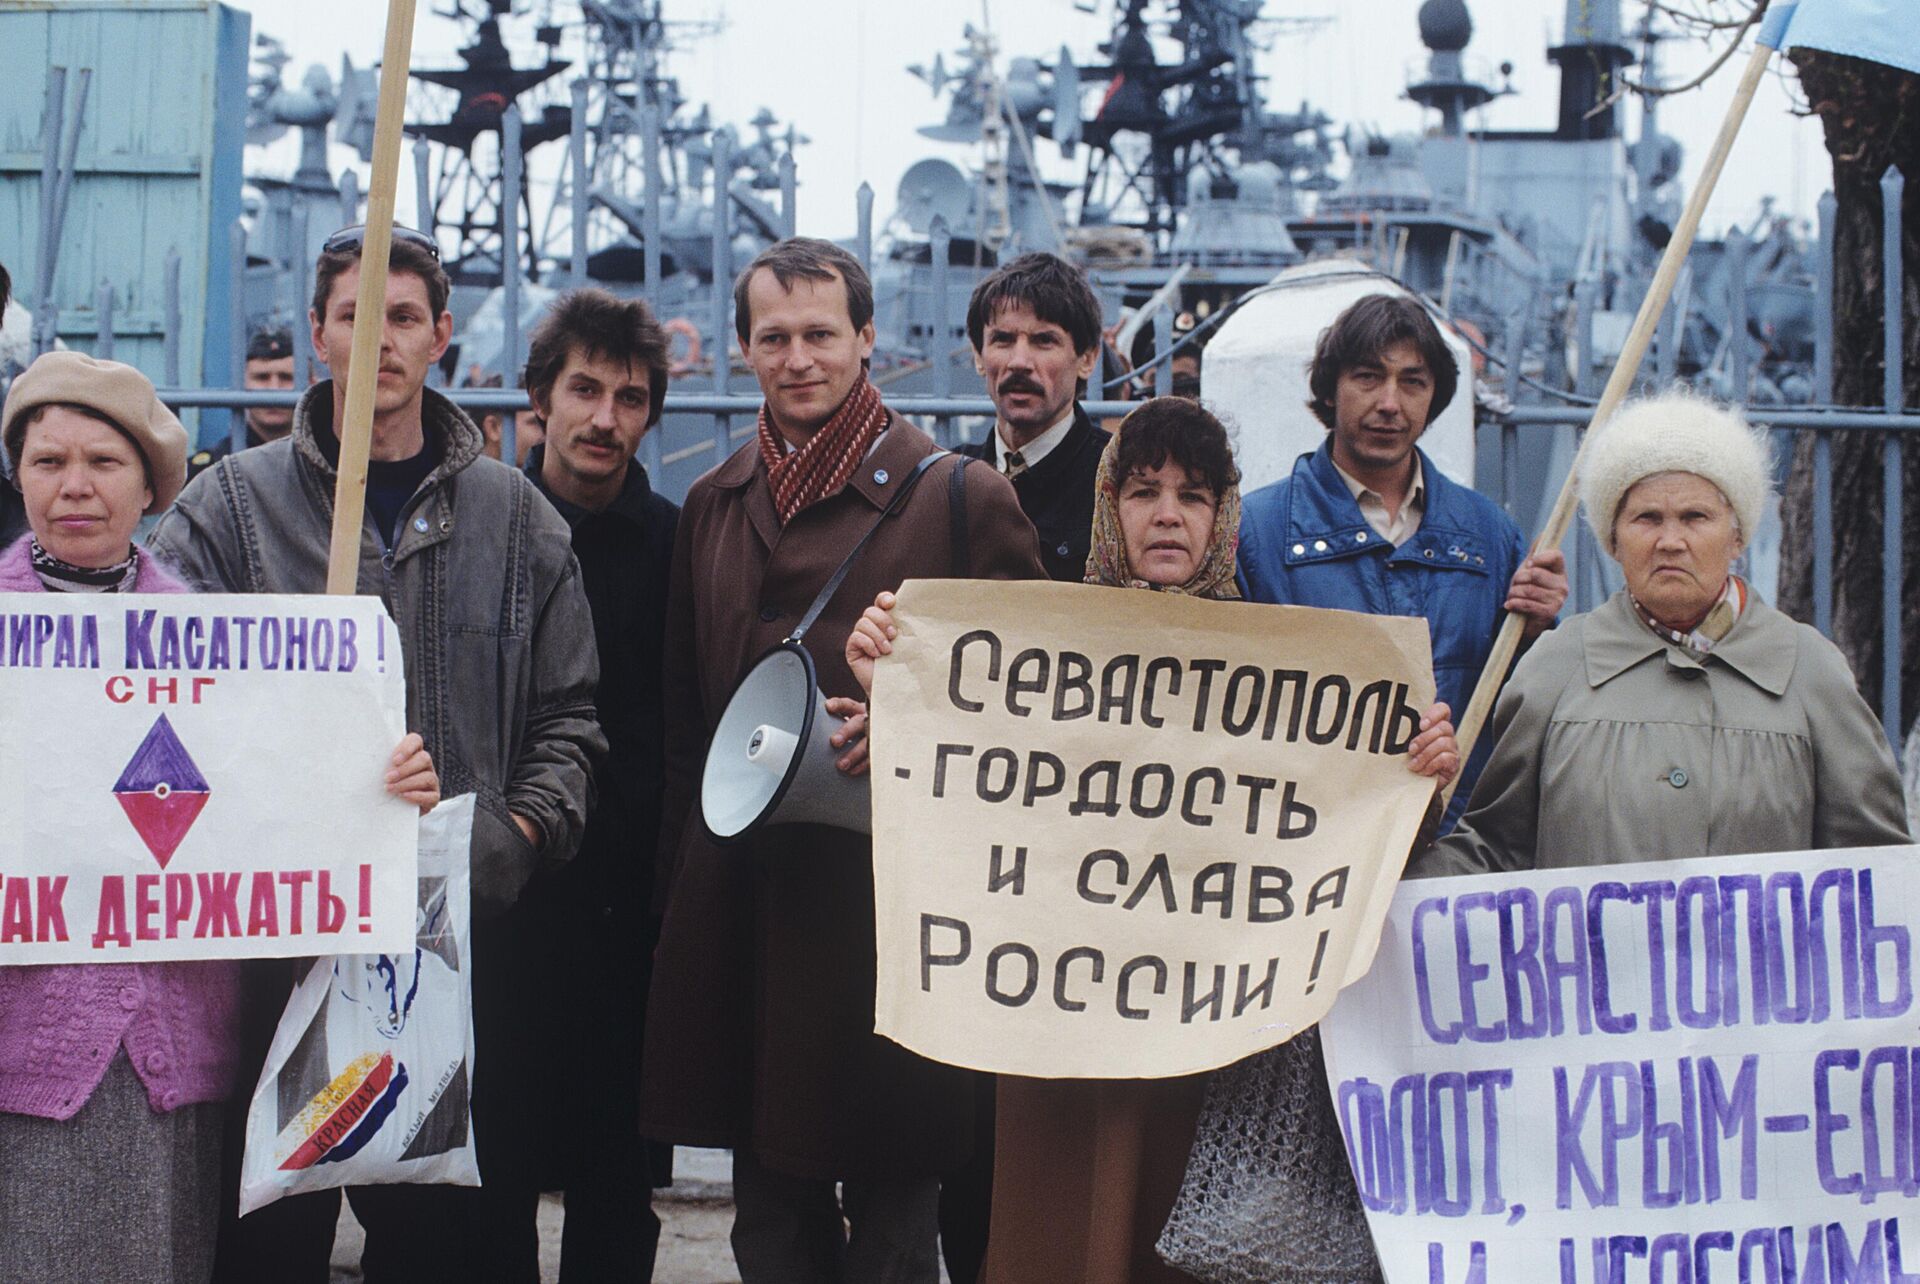 Demonstrators stand in front of warships of the Black Sea Fleet in Sevastopol demanding the return of the city and Crimea to Russia. Center poster reads Sevastopol is the pride and glory of Russia! April 1992. - Sputnik International, 1920, 13.05.2023